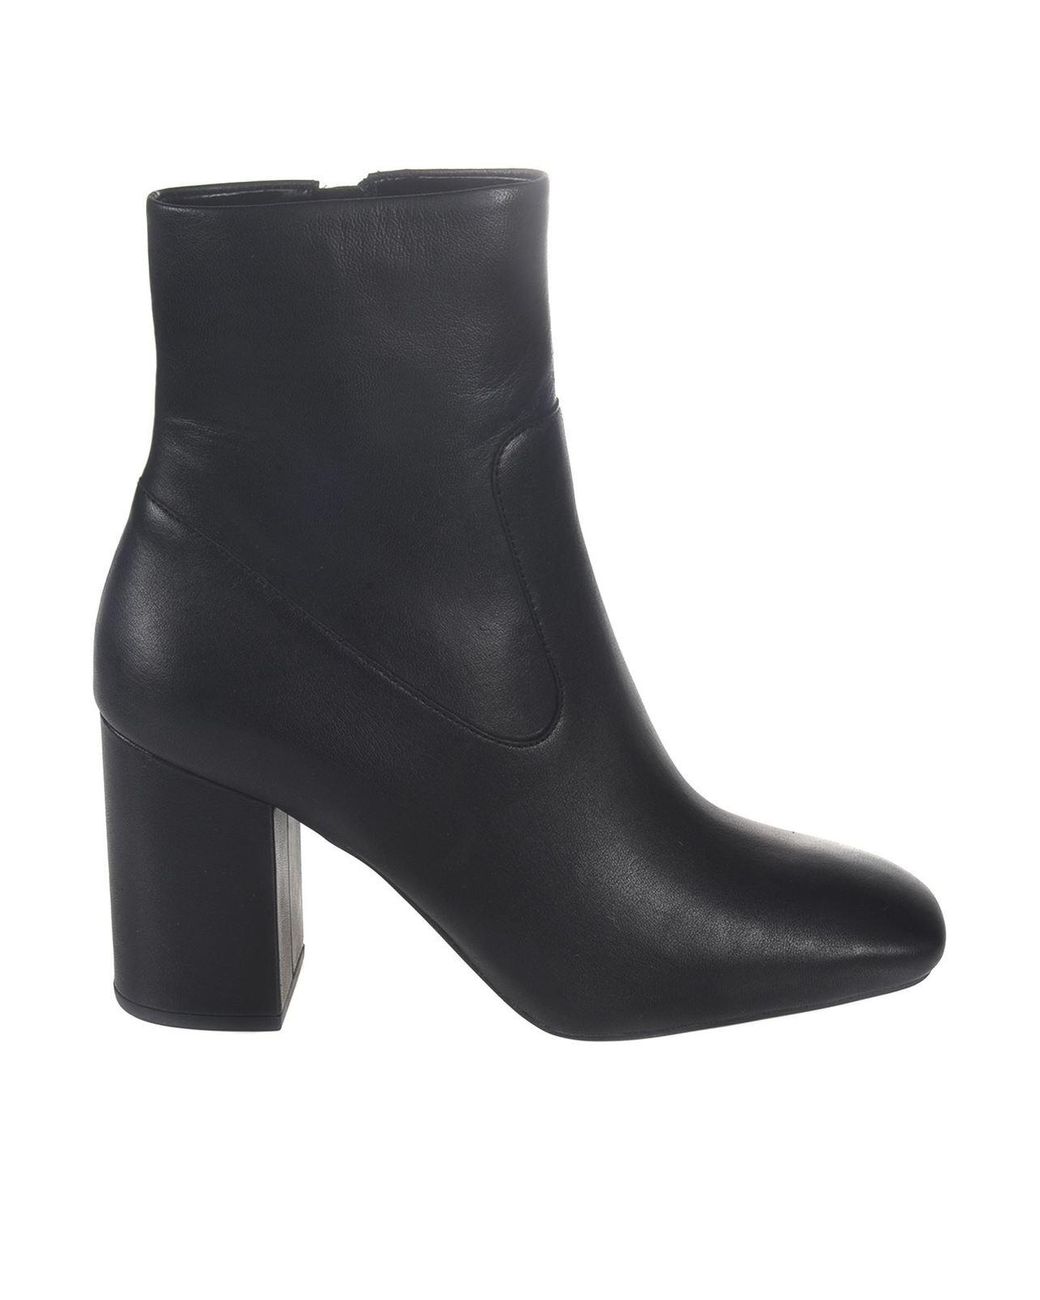 Michael Kors Leather Marcella Ankle Boots In Black - Lyst